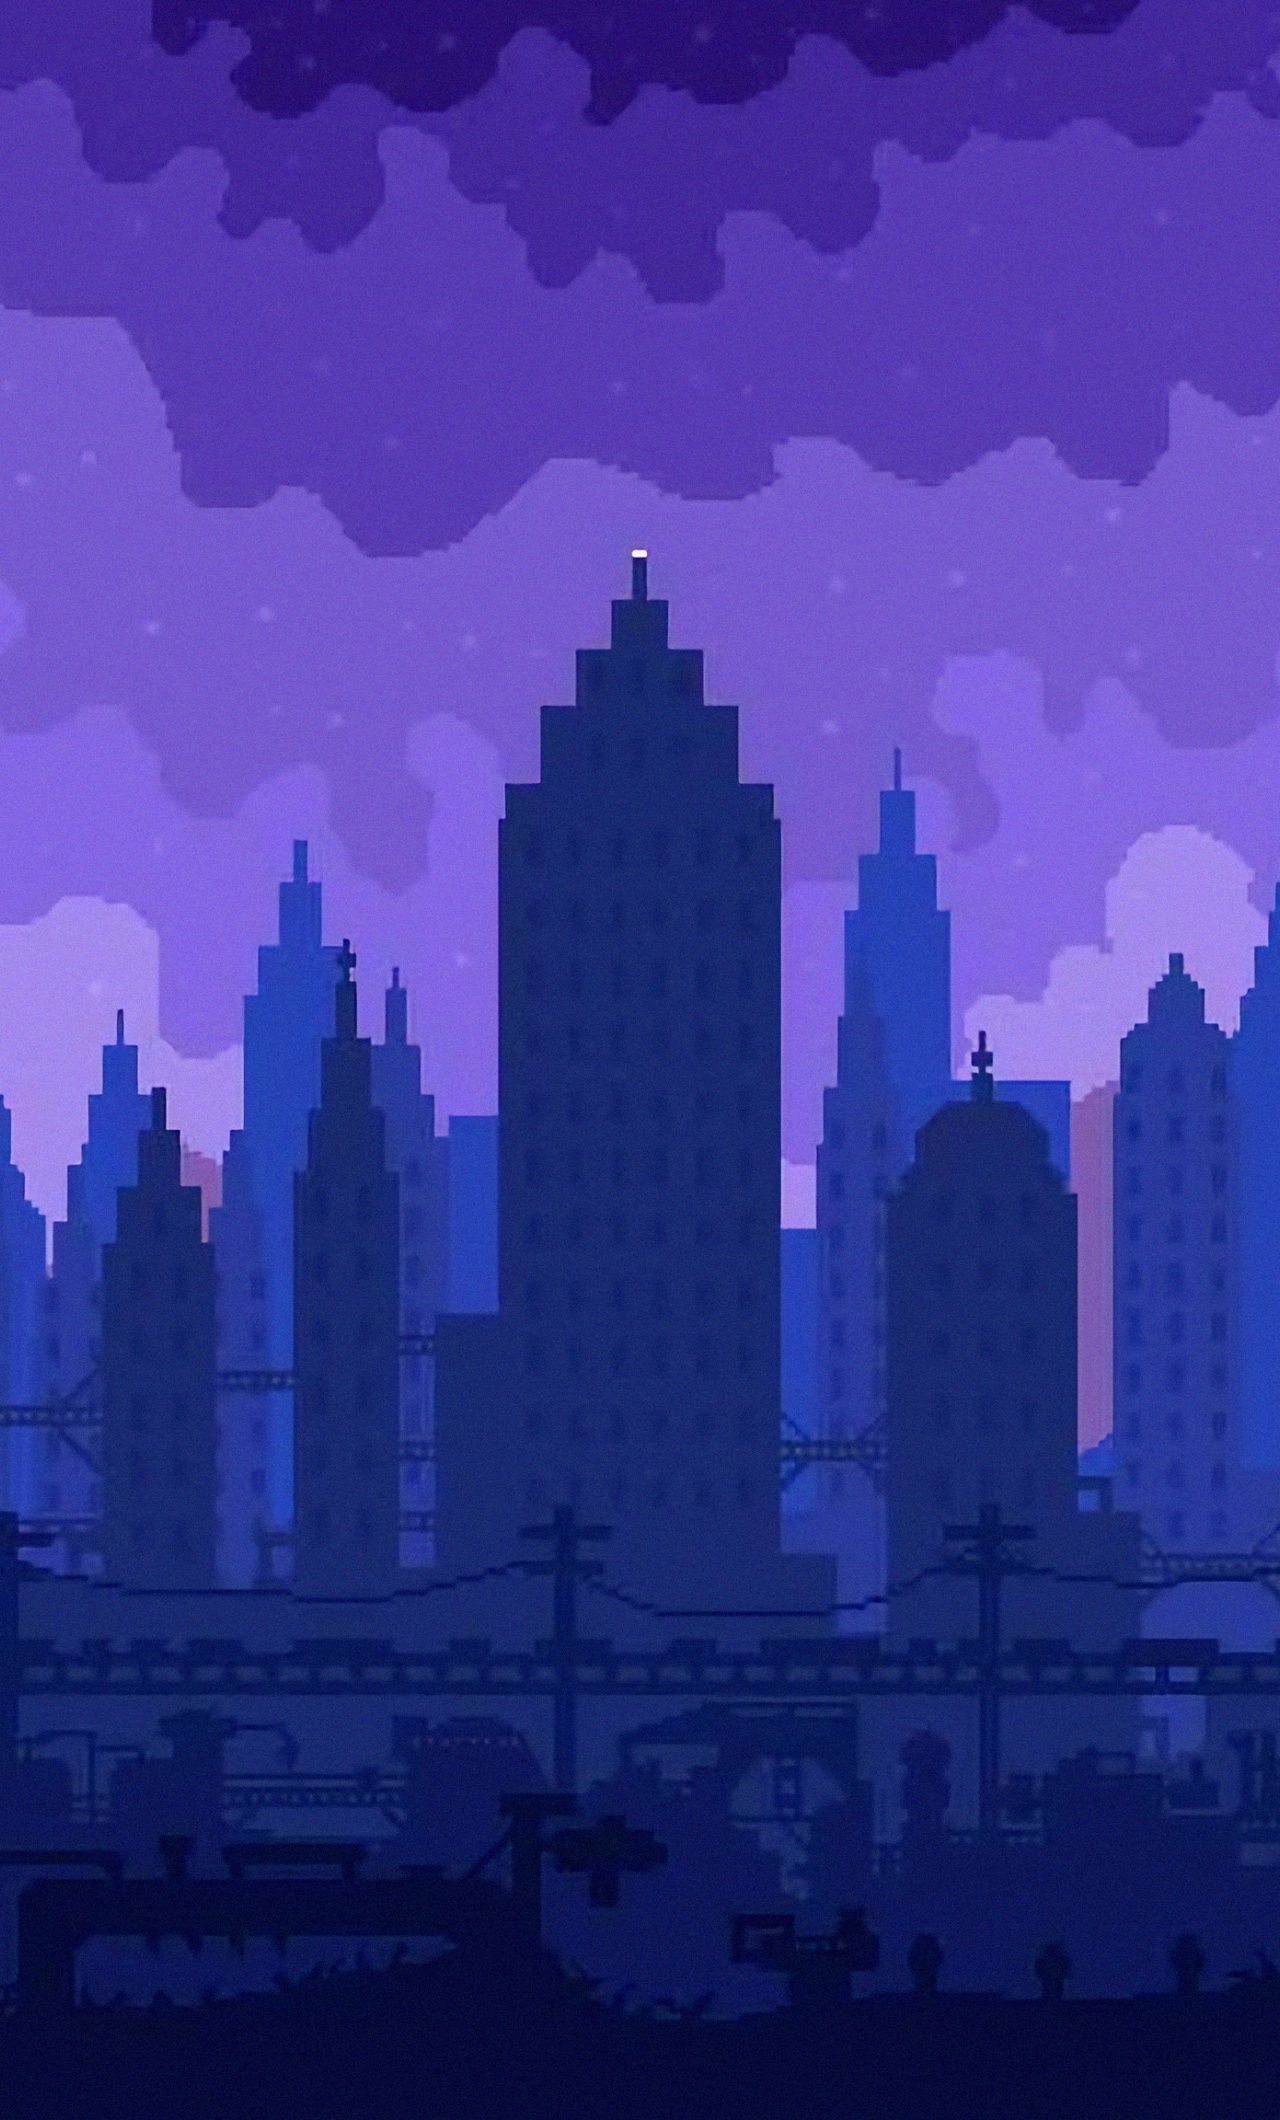 Download High skies, cityscape, silhouette, pixel art wallpaper, 1280x iPhone 6 Plus